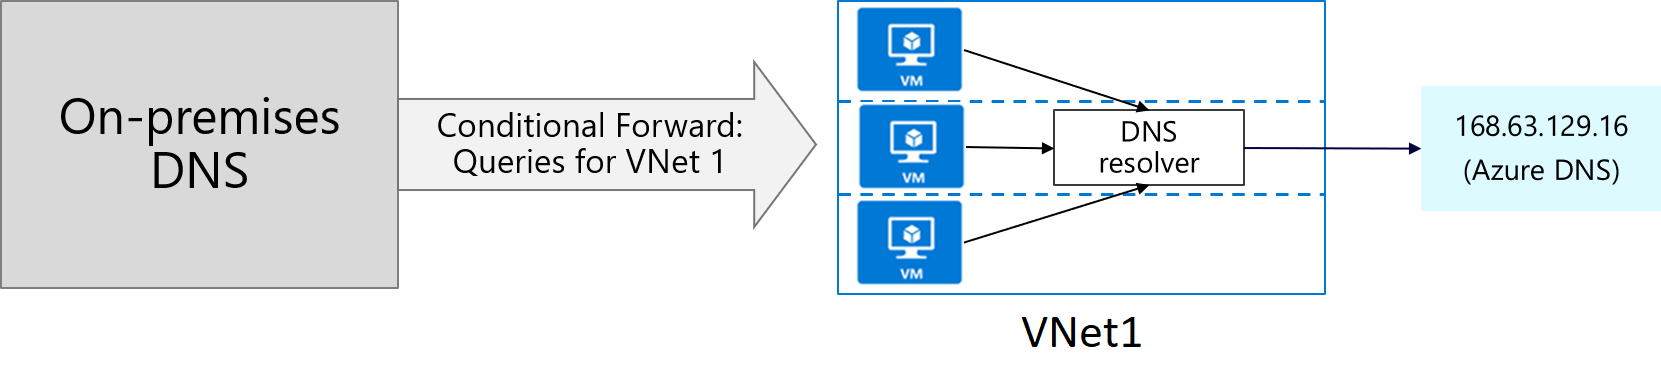 On-premises DNS server uses conditional forwarding to forward queries for VNet 1. DNS resolver in VNet 1 sends queries to Azure DNS for resolution.